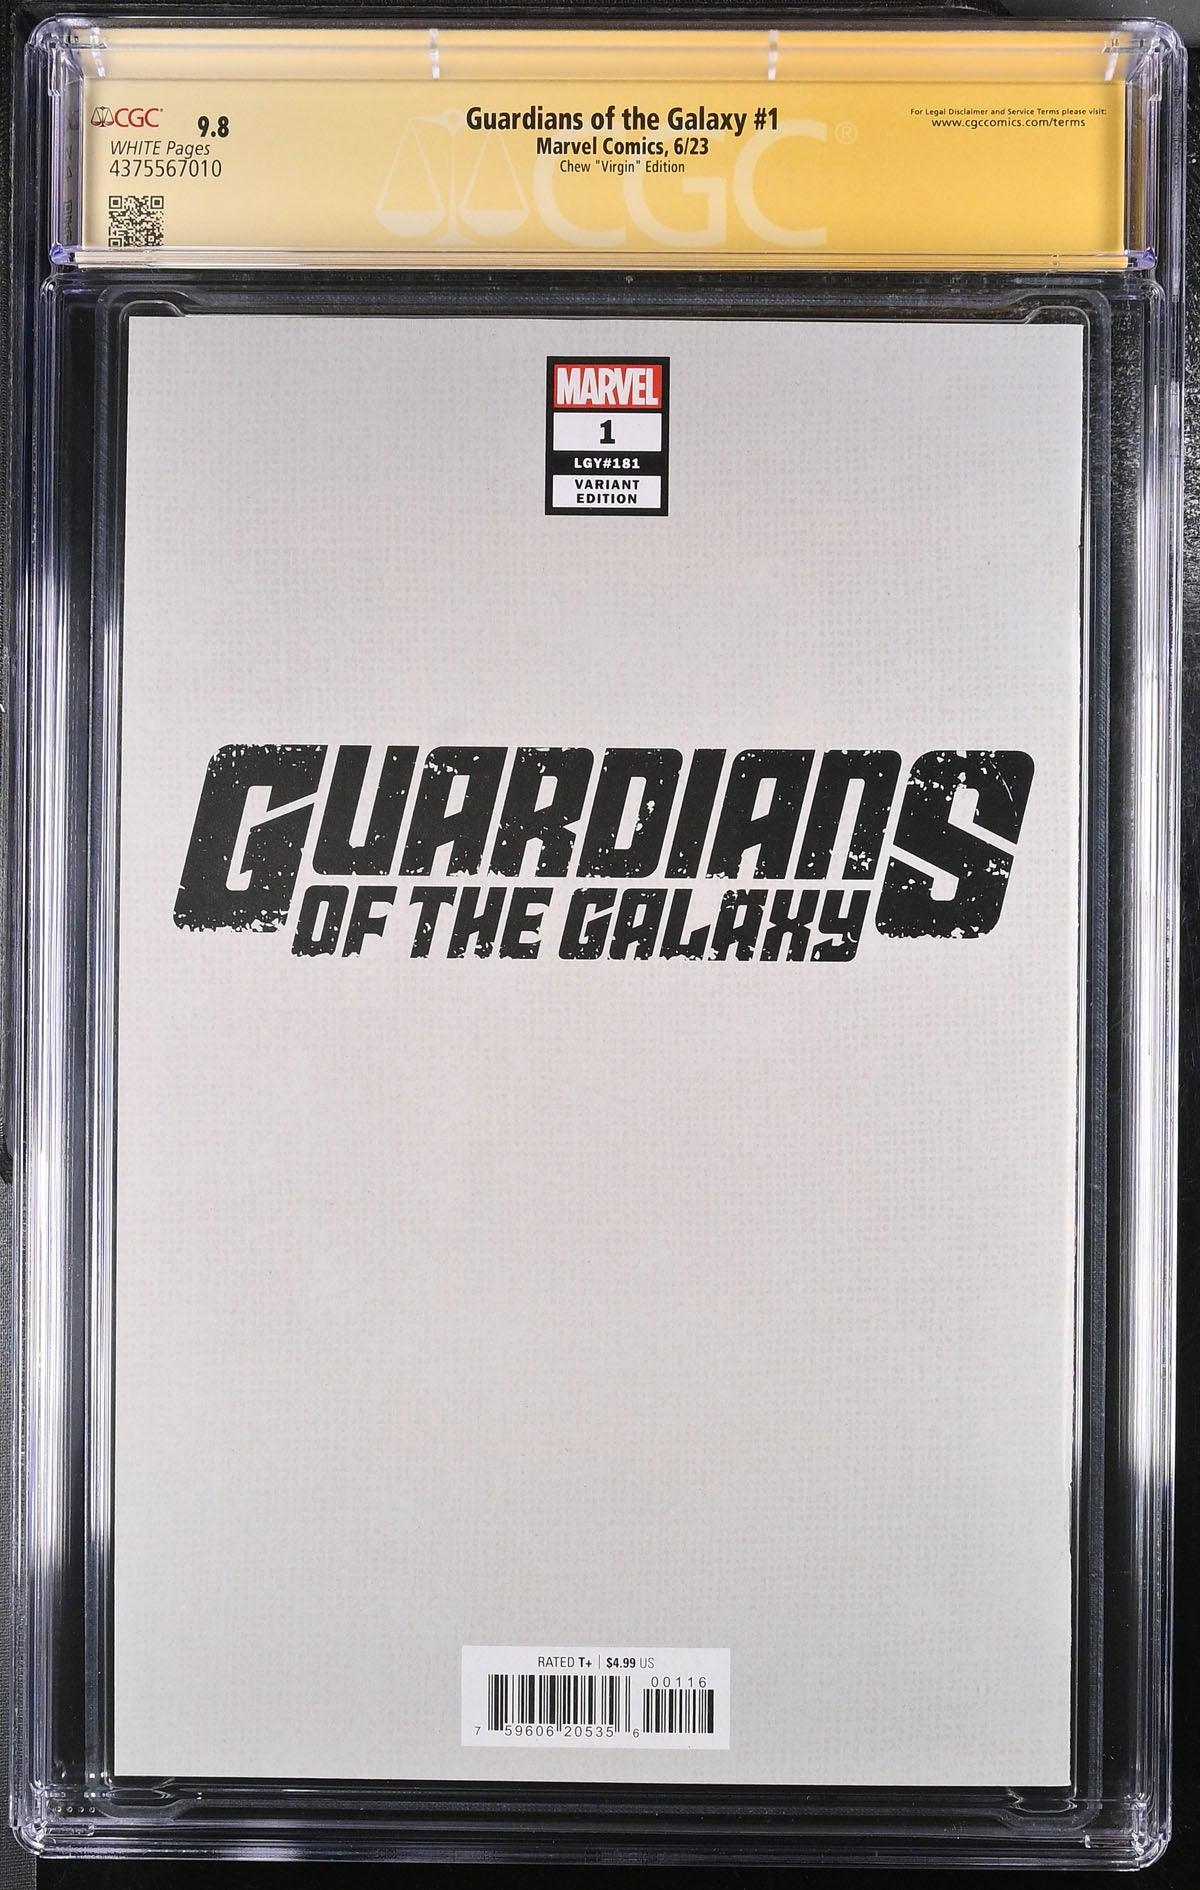 CGC GUARDIANS OF THE GALAXY VOL 7 #1 1:50 CHEW "VIRGIN" EDITION (9.8) SIGNATURE SERIES - SIGNED BY DERRICK CHEW - Kings Comics